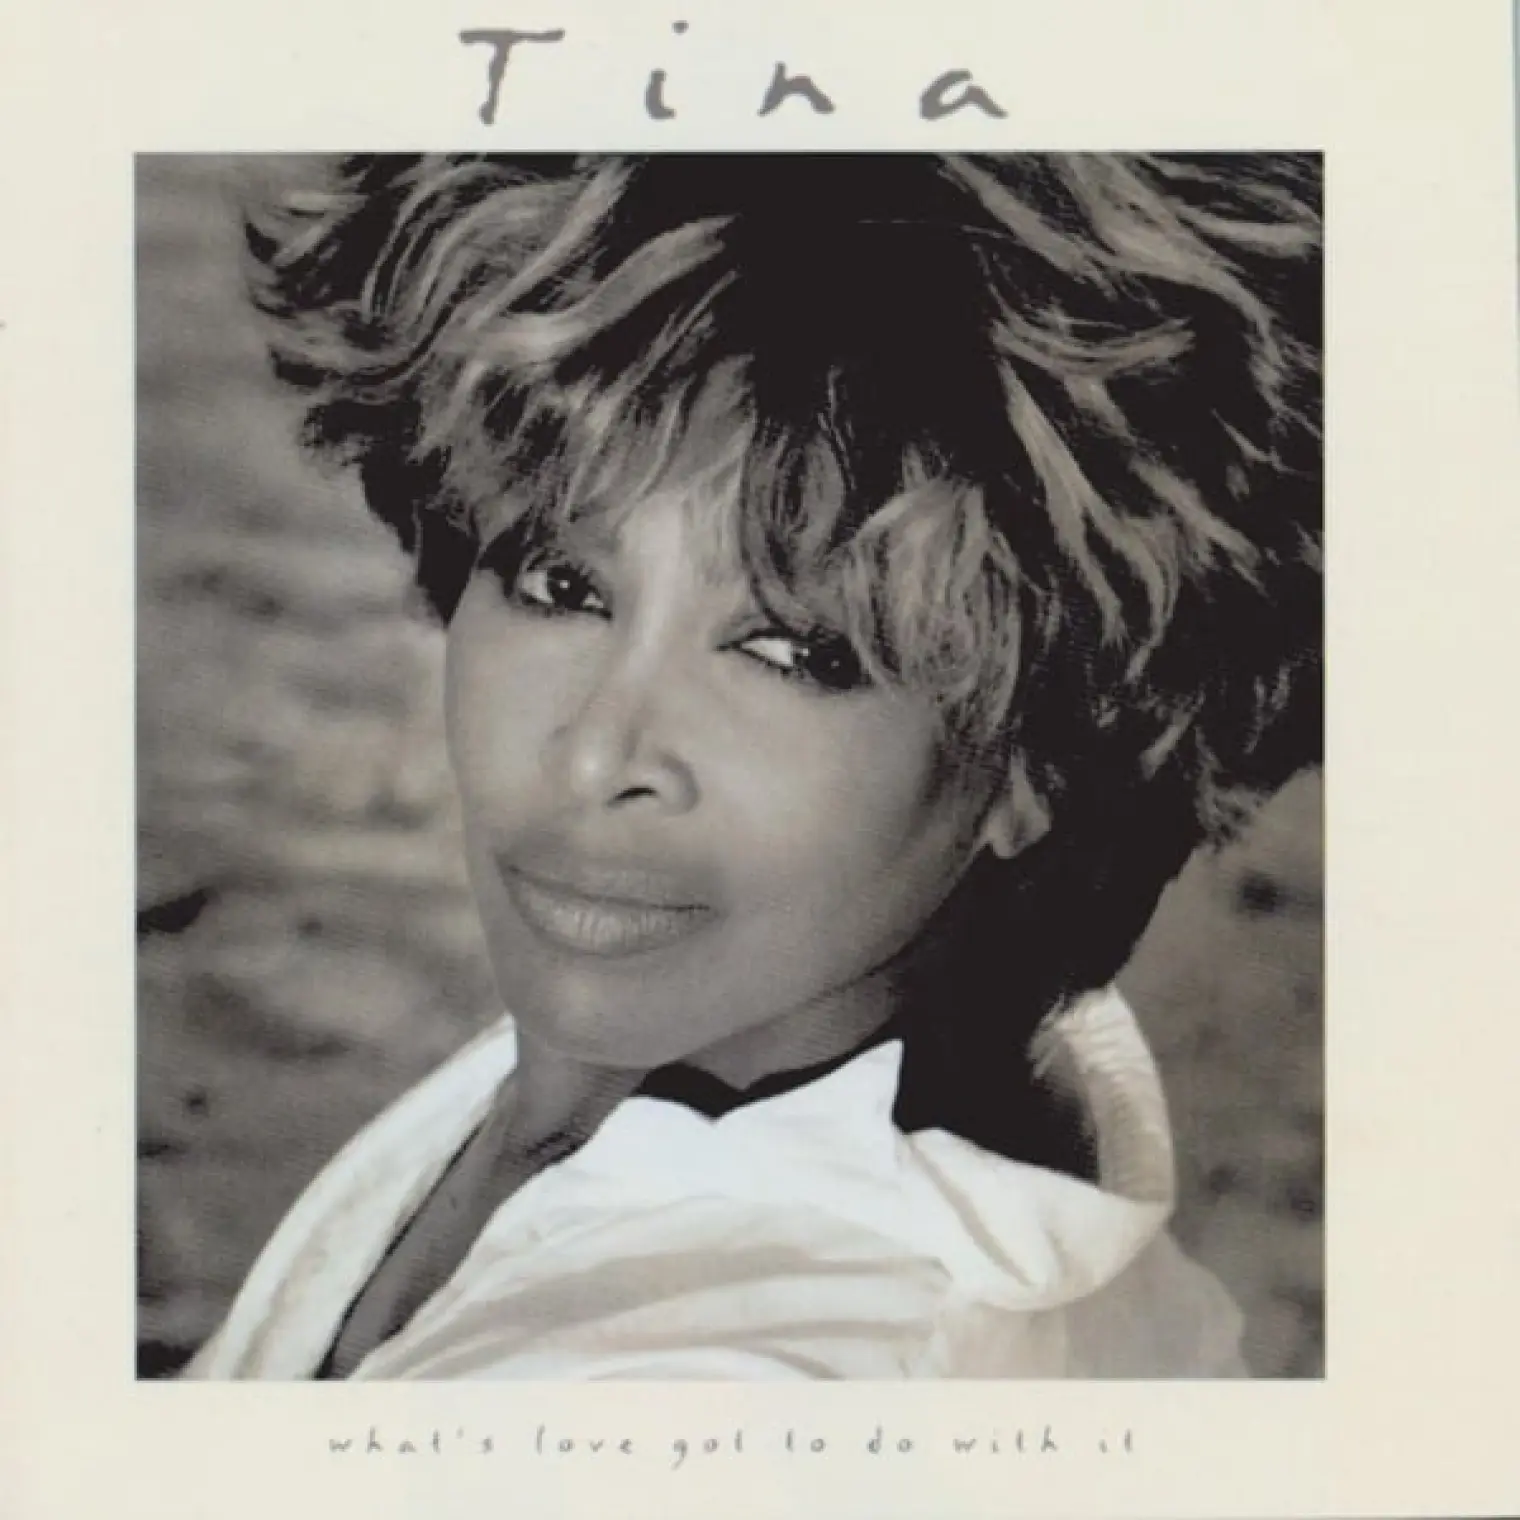 What's Love Got to Do with It? -  Tina Turner 